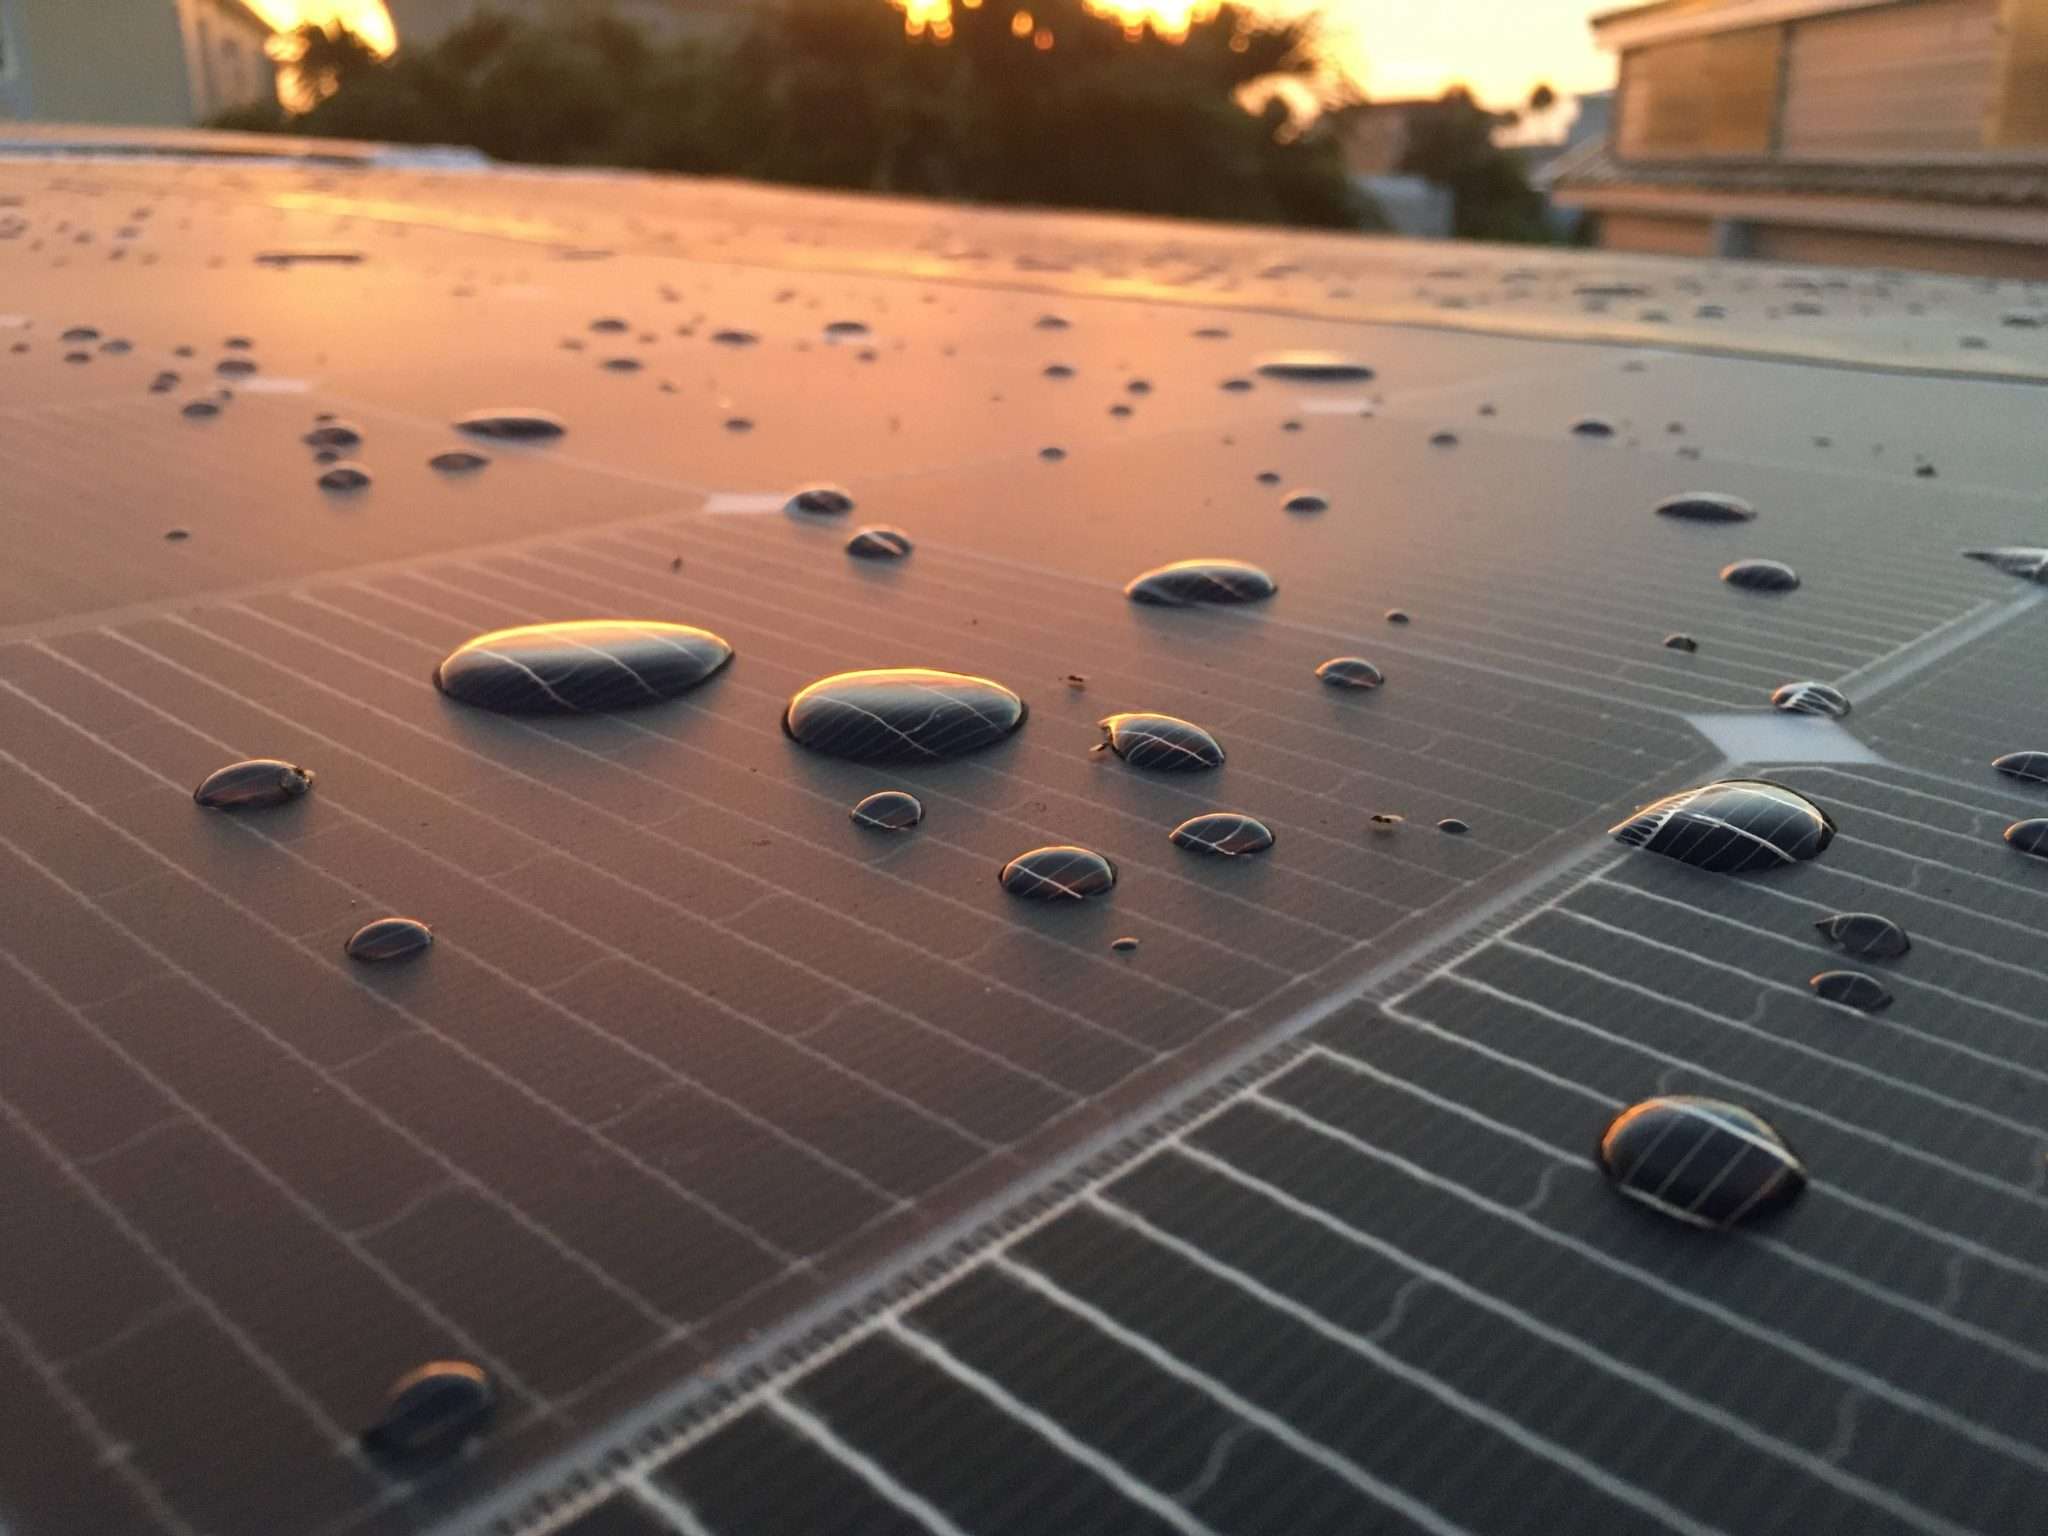 solar panel at sunset with water droplet